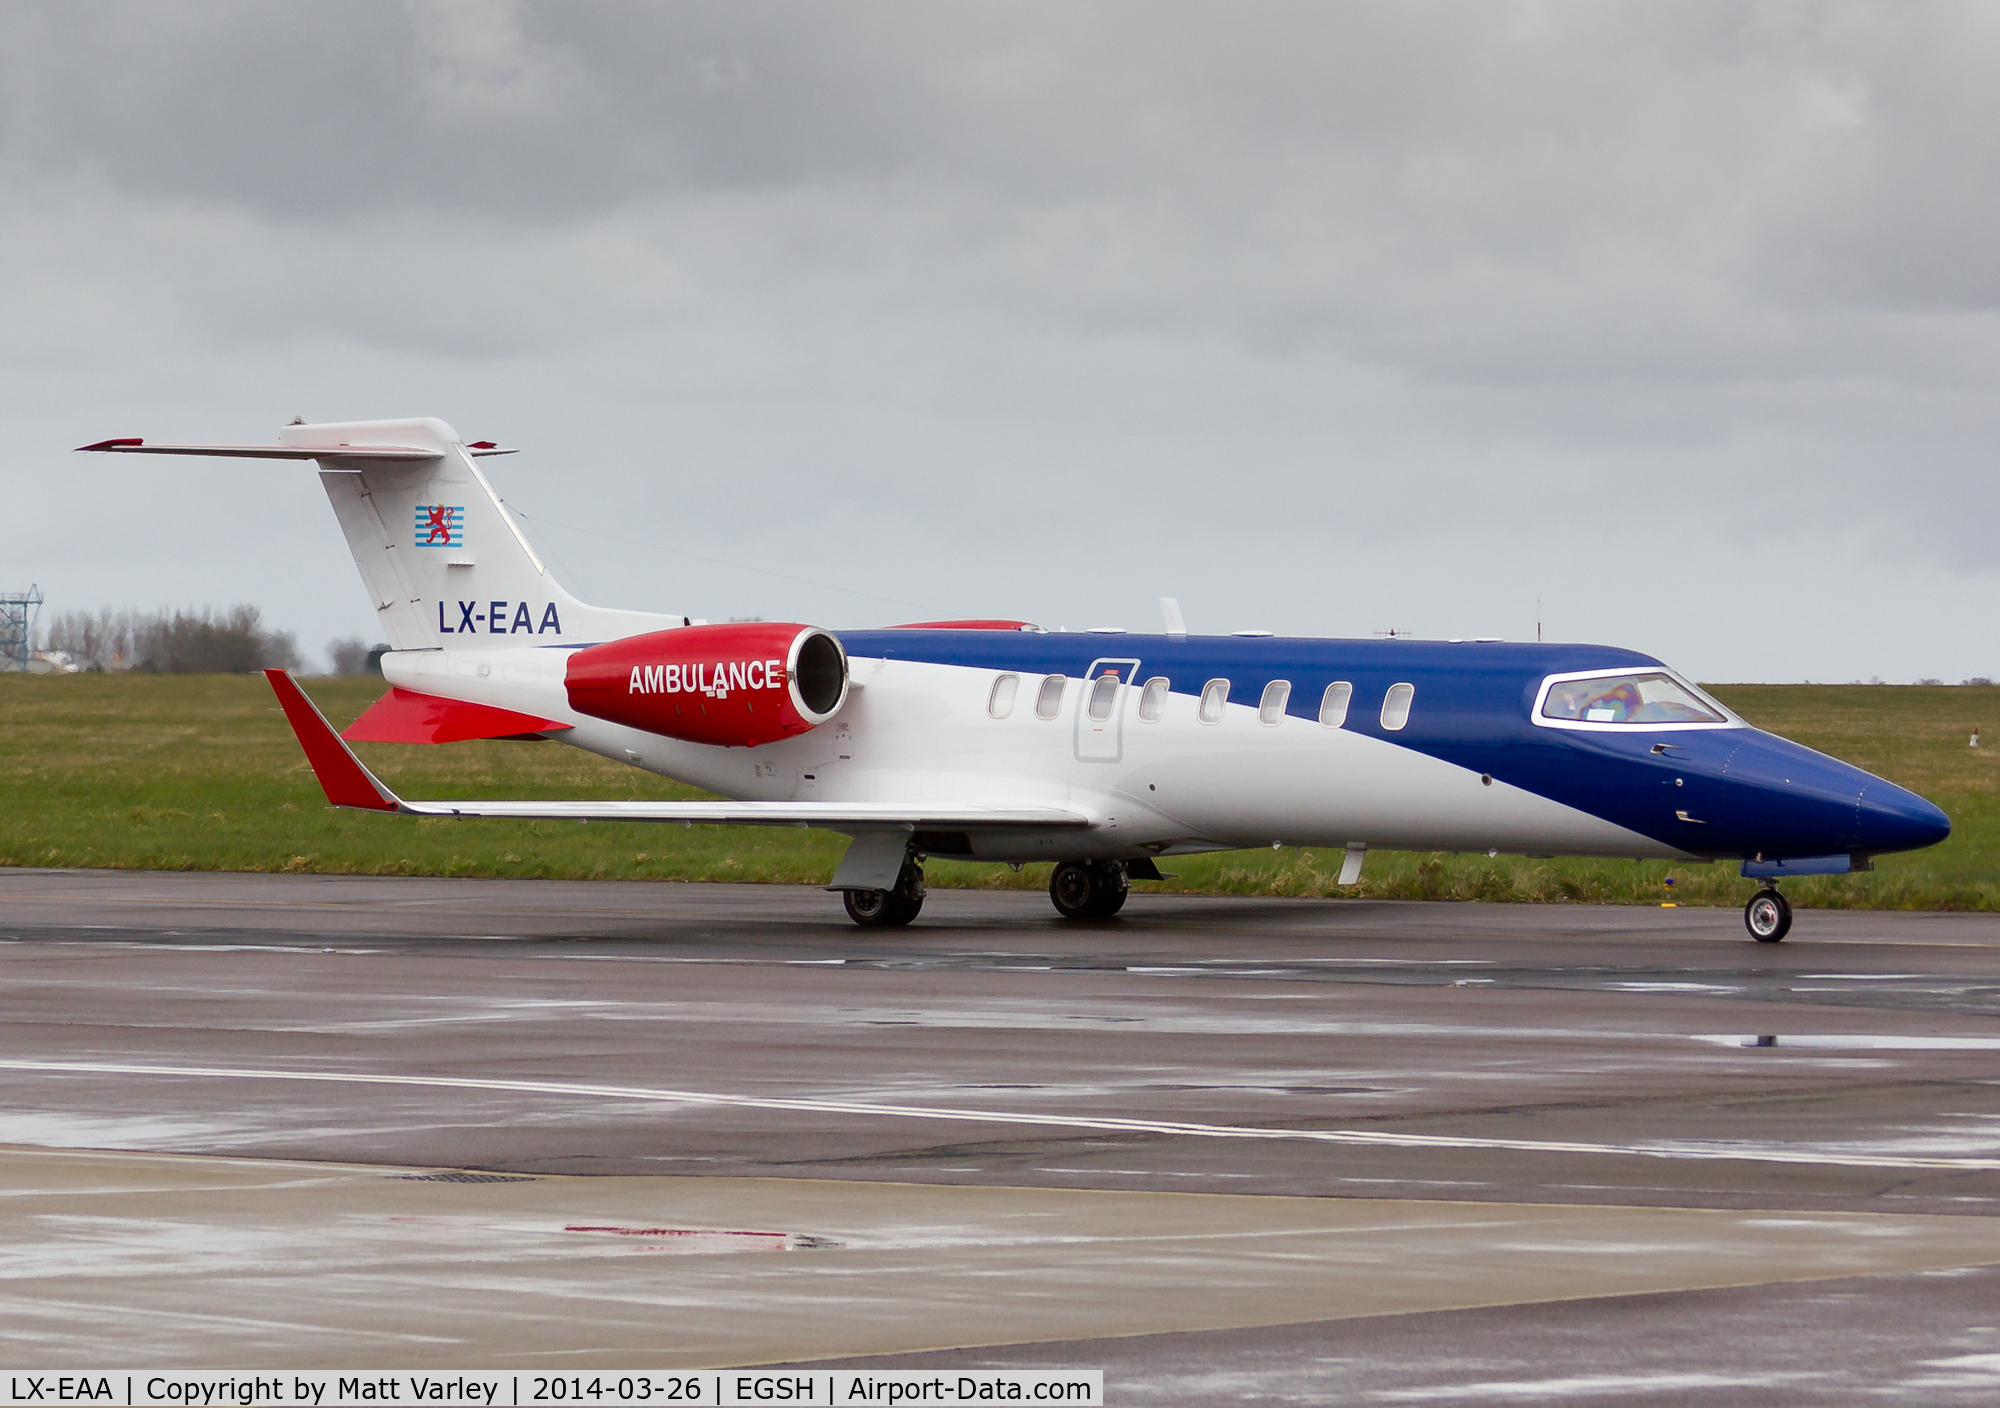 LX-EAA, 2006 Learjet 45 C/N 321, Taxiing to the SaxonAir ramp in some challenging conditions :)